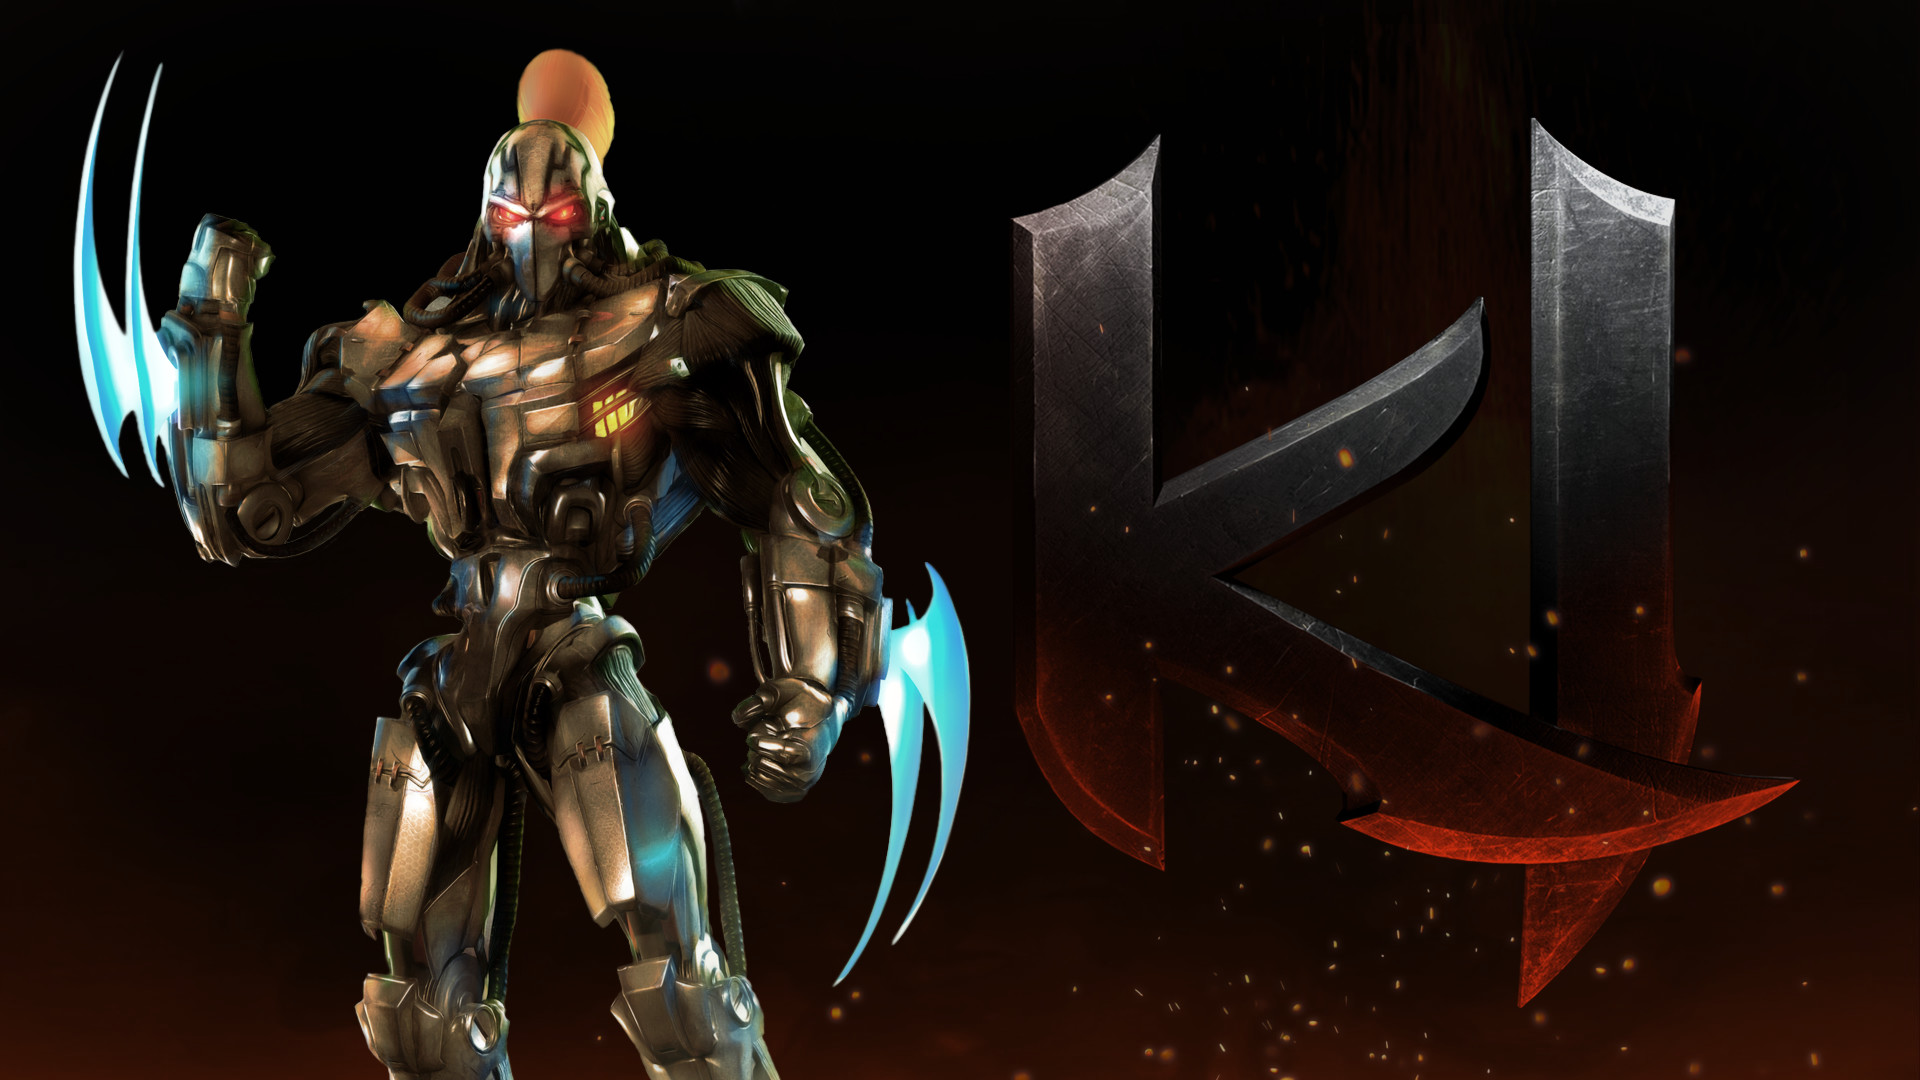 1920x1080 ... Killer Instinct Wallpapers Group (63 ) EXCLUSIVE: Orchid & Spinal  iPhone/Android Wallpapers!